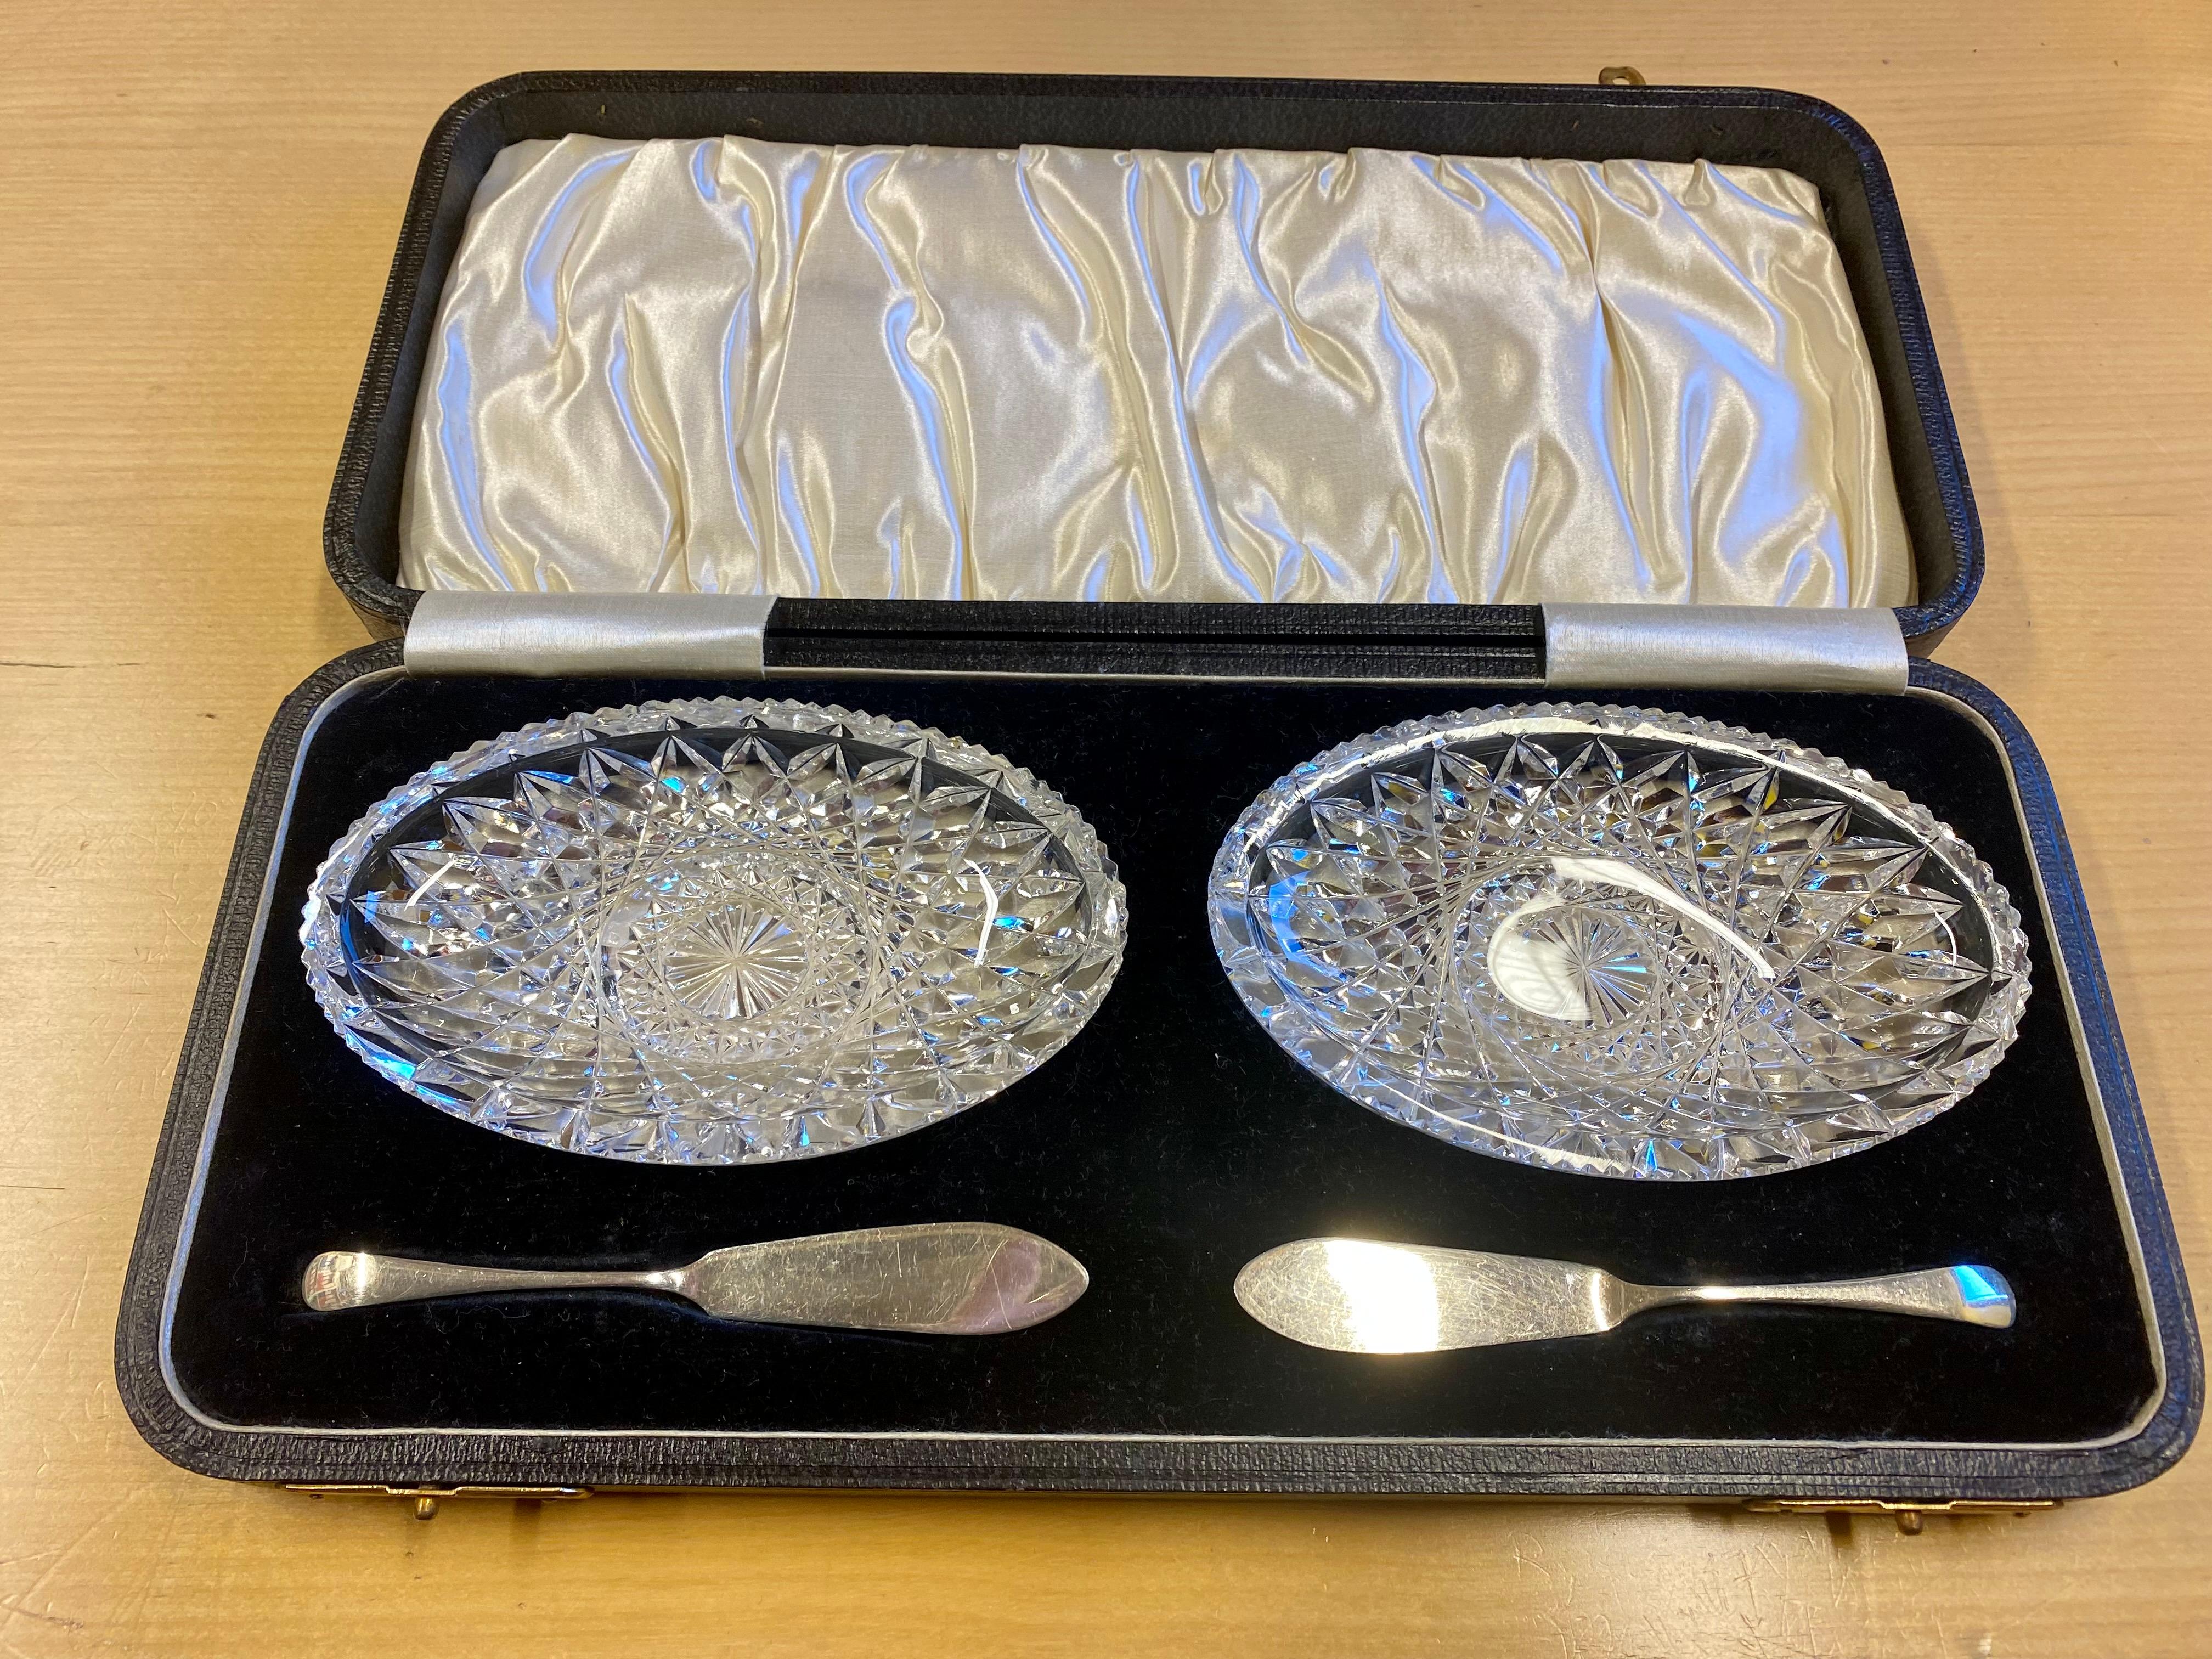 Caviar, Red Roe or Butter serving set
Made in England.
Spoons of Silver with English stamps on them.
Fine Crystal Bowls.
Original Case.
Really great set.
The box is 29cm long and 13.5cm deep.
Thickness about 3.7cm.
The crystal bowl is 12.2 cm long